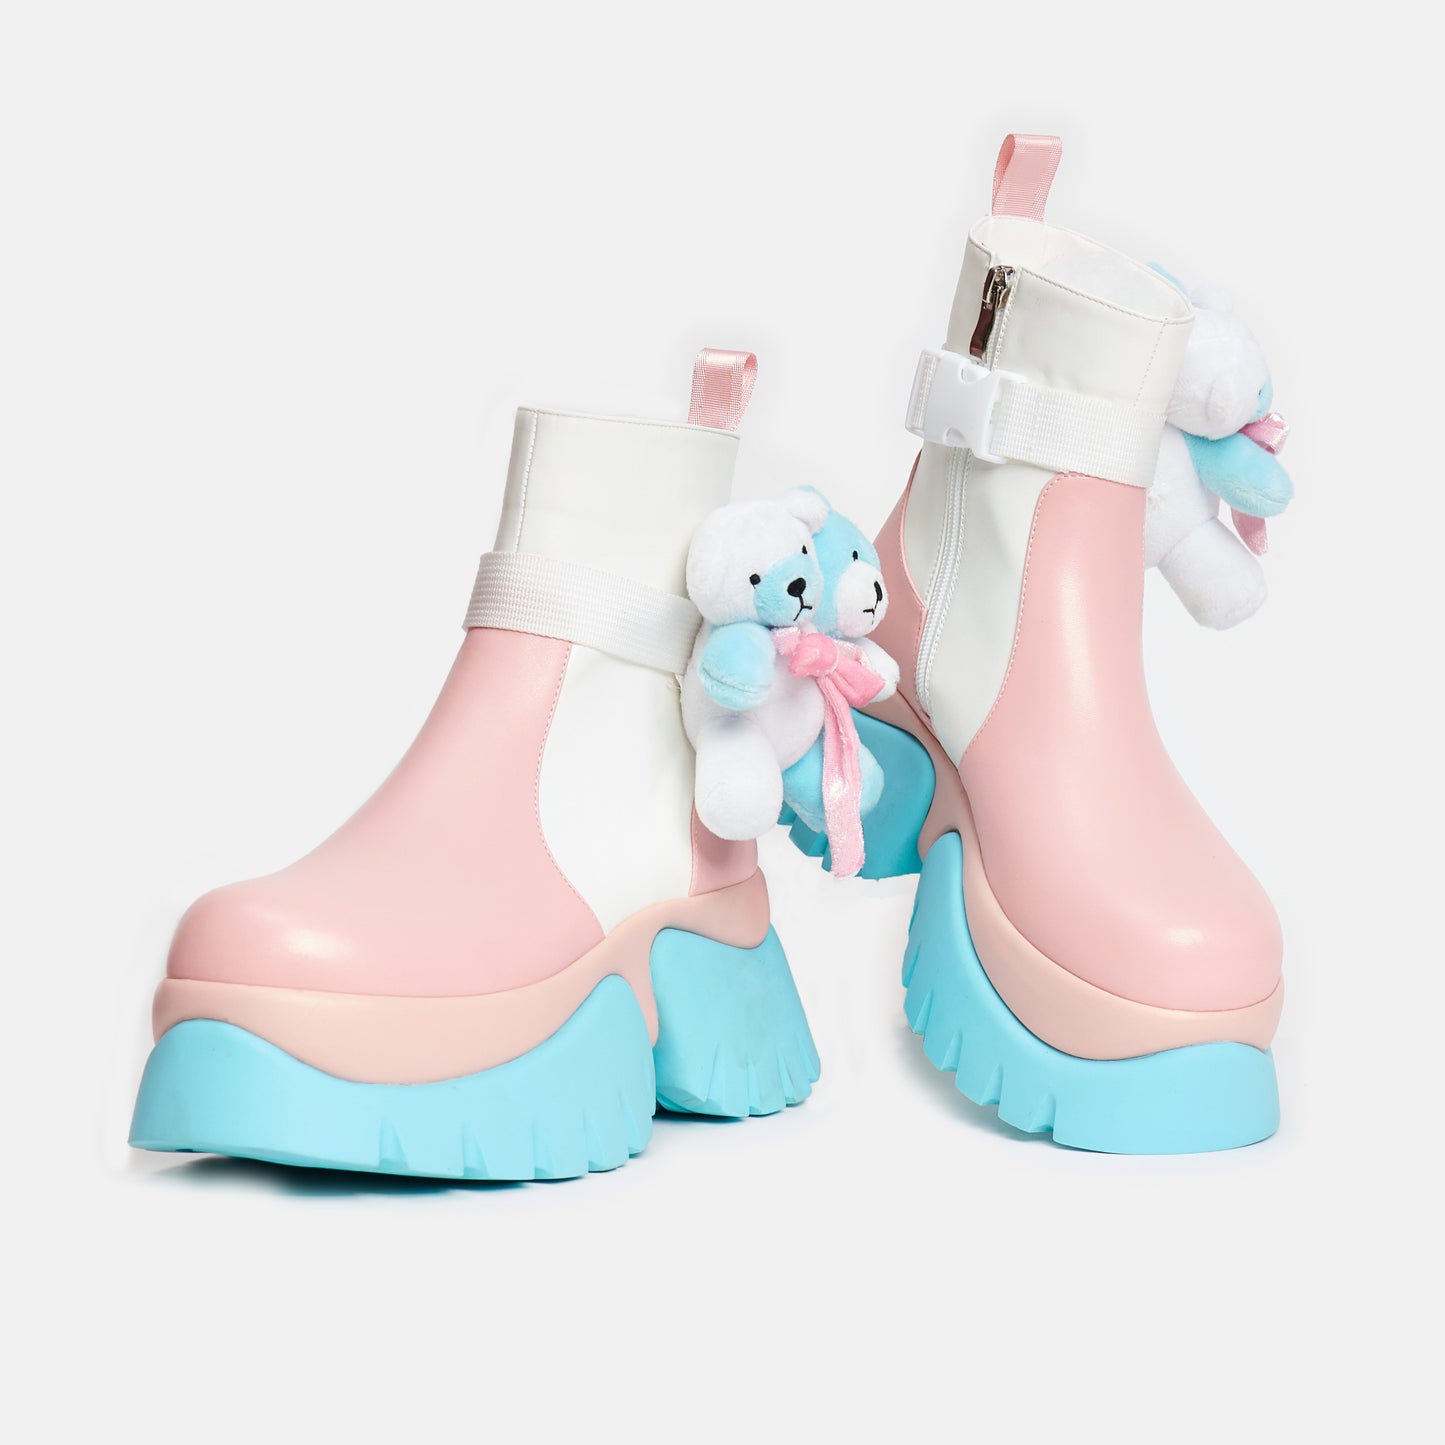 Teddy Bear Pastel Platform Boots - Ankle Boots - KOI Footwear - Multi - Front Views